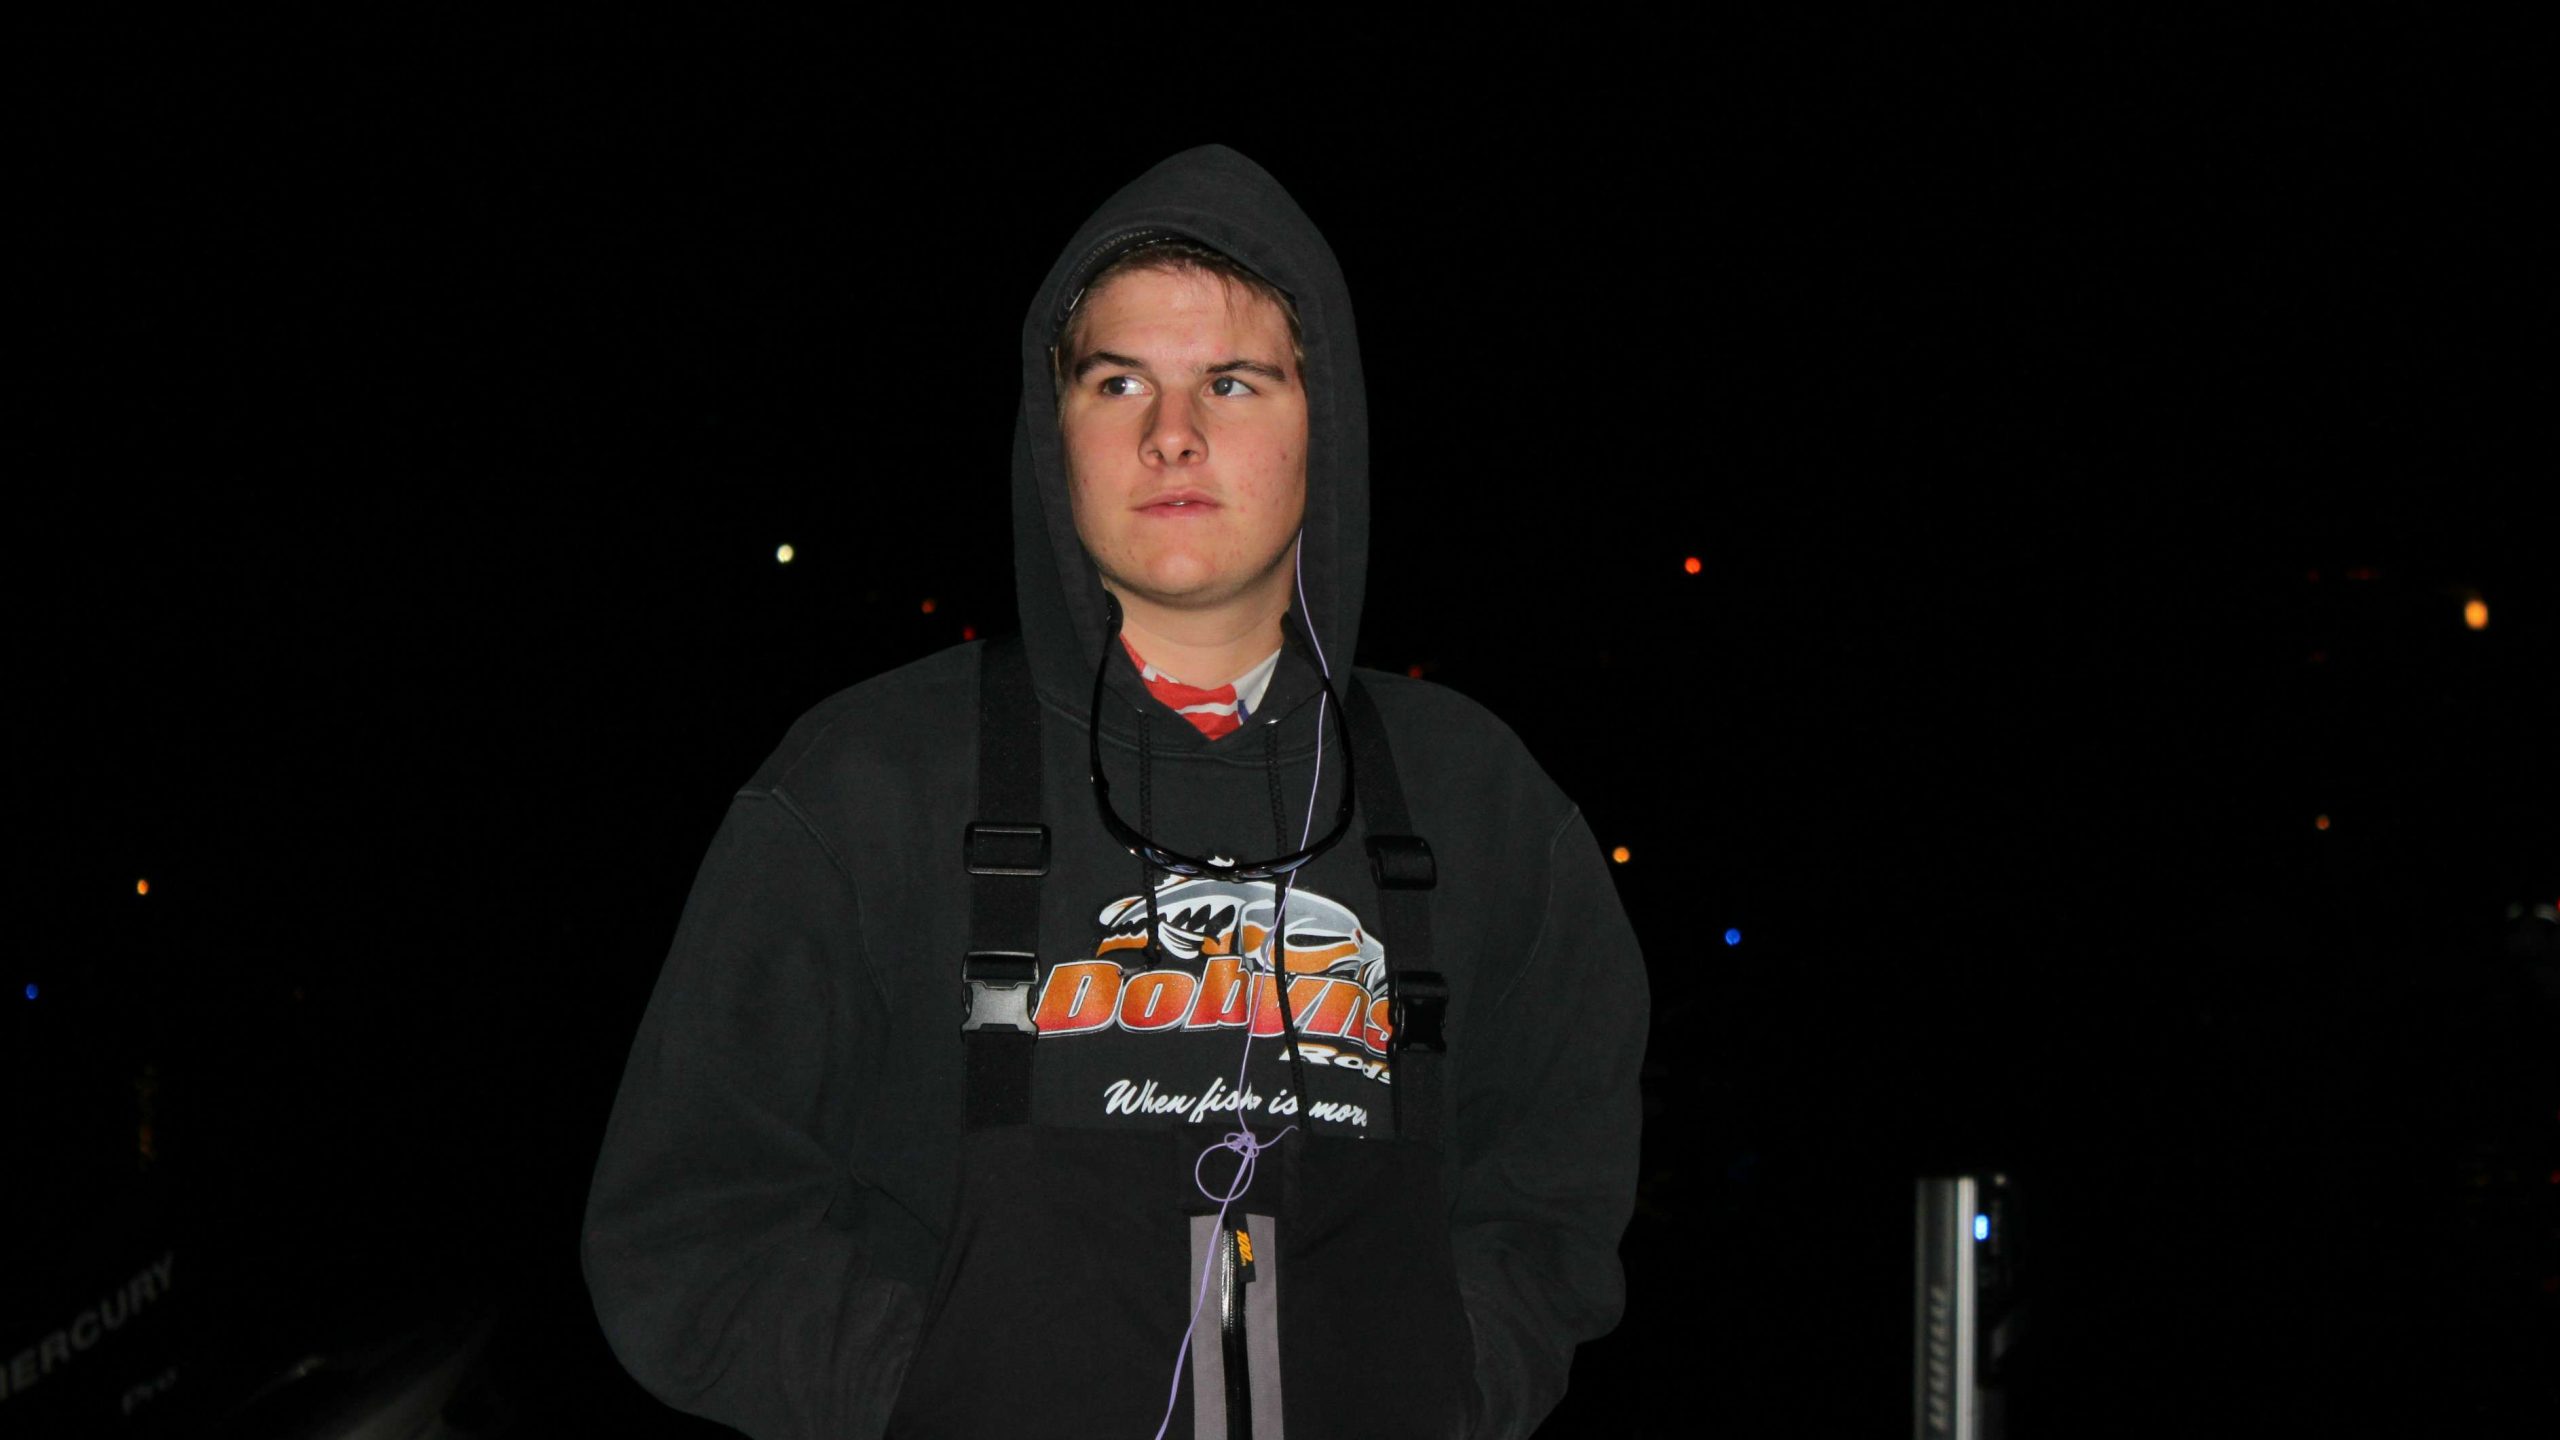 Ethan LeGare of Lovejoy (Tex.) High School awaits his boat
number to be called in the pre-dawn darkness.